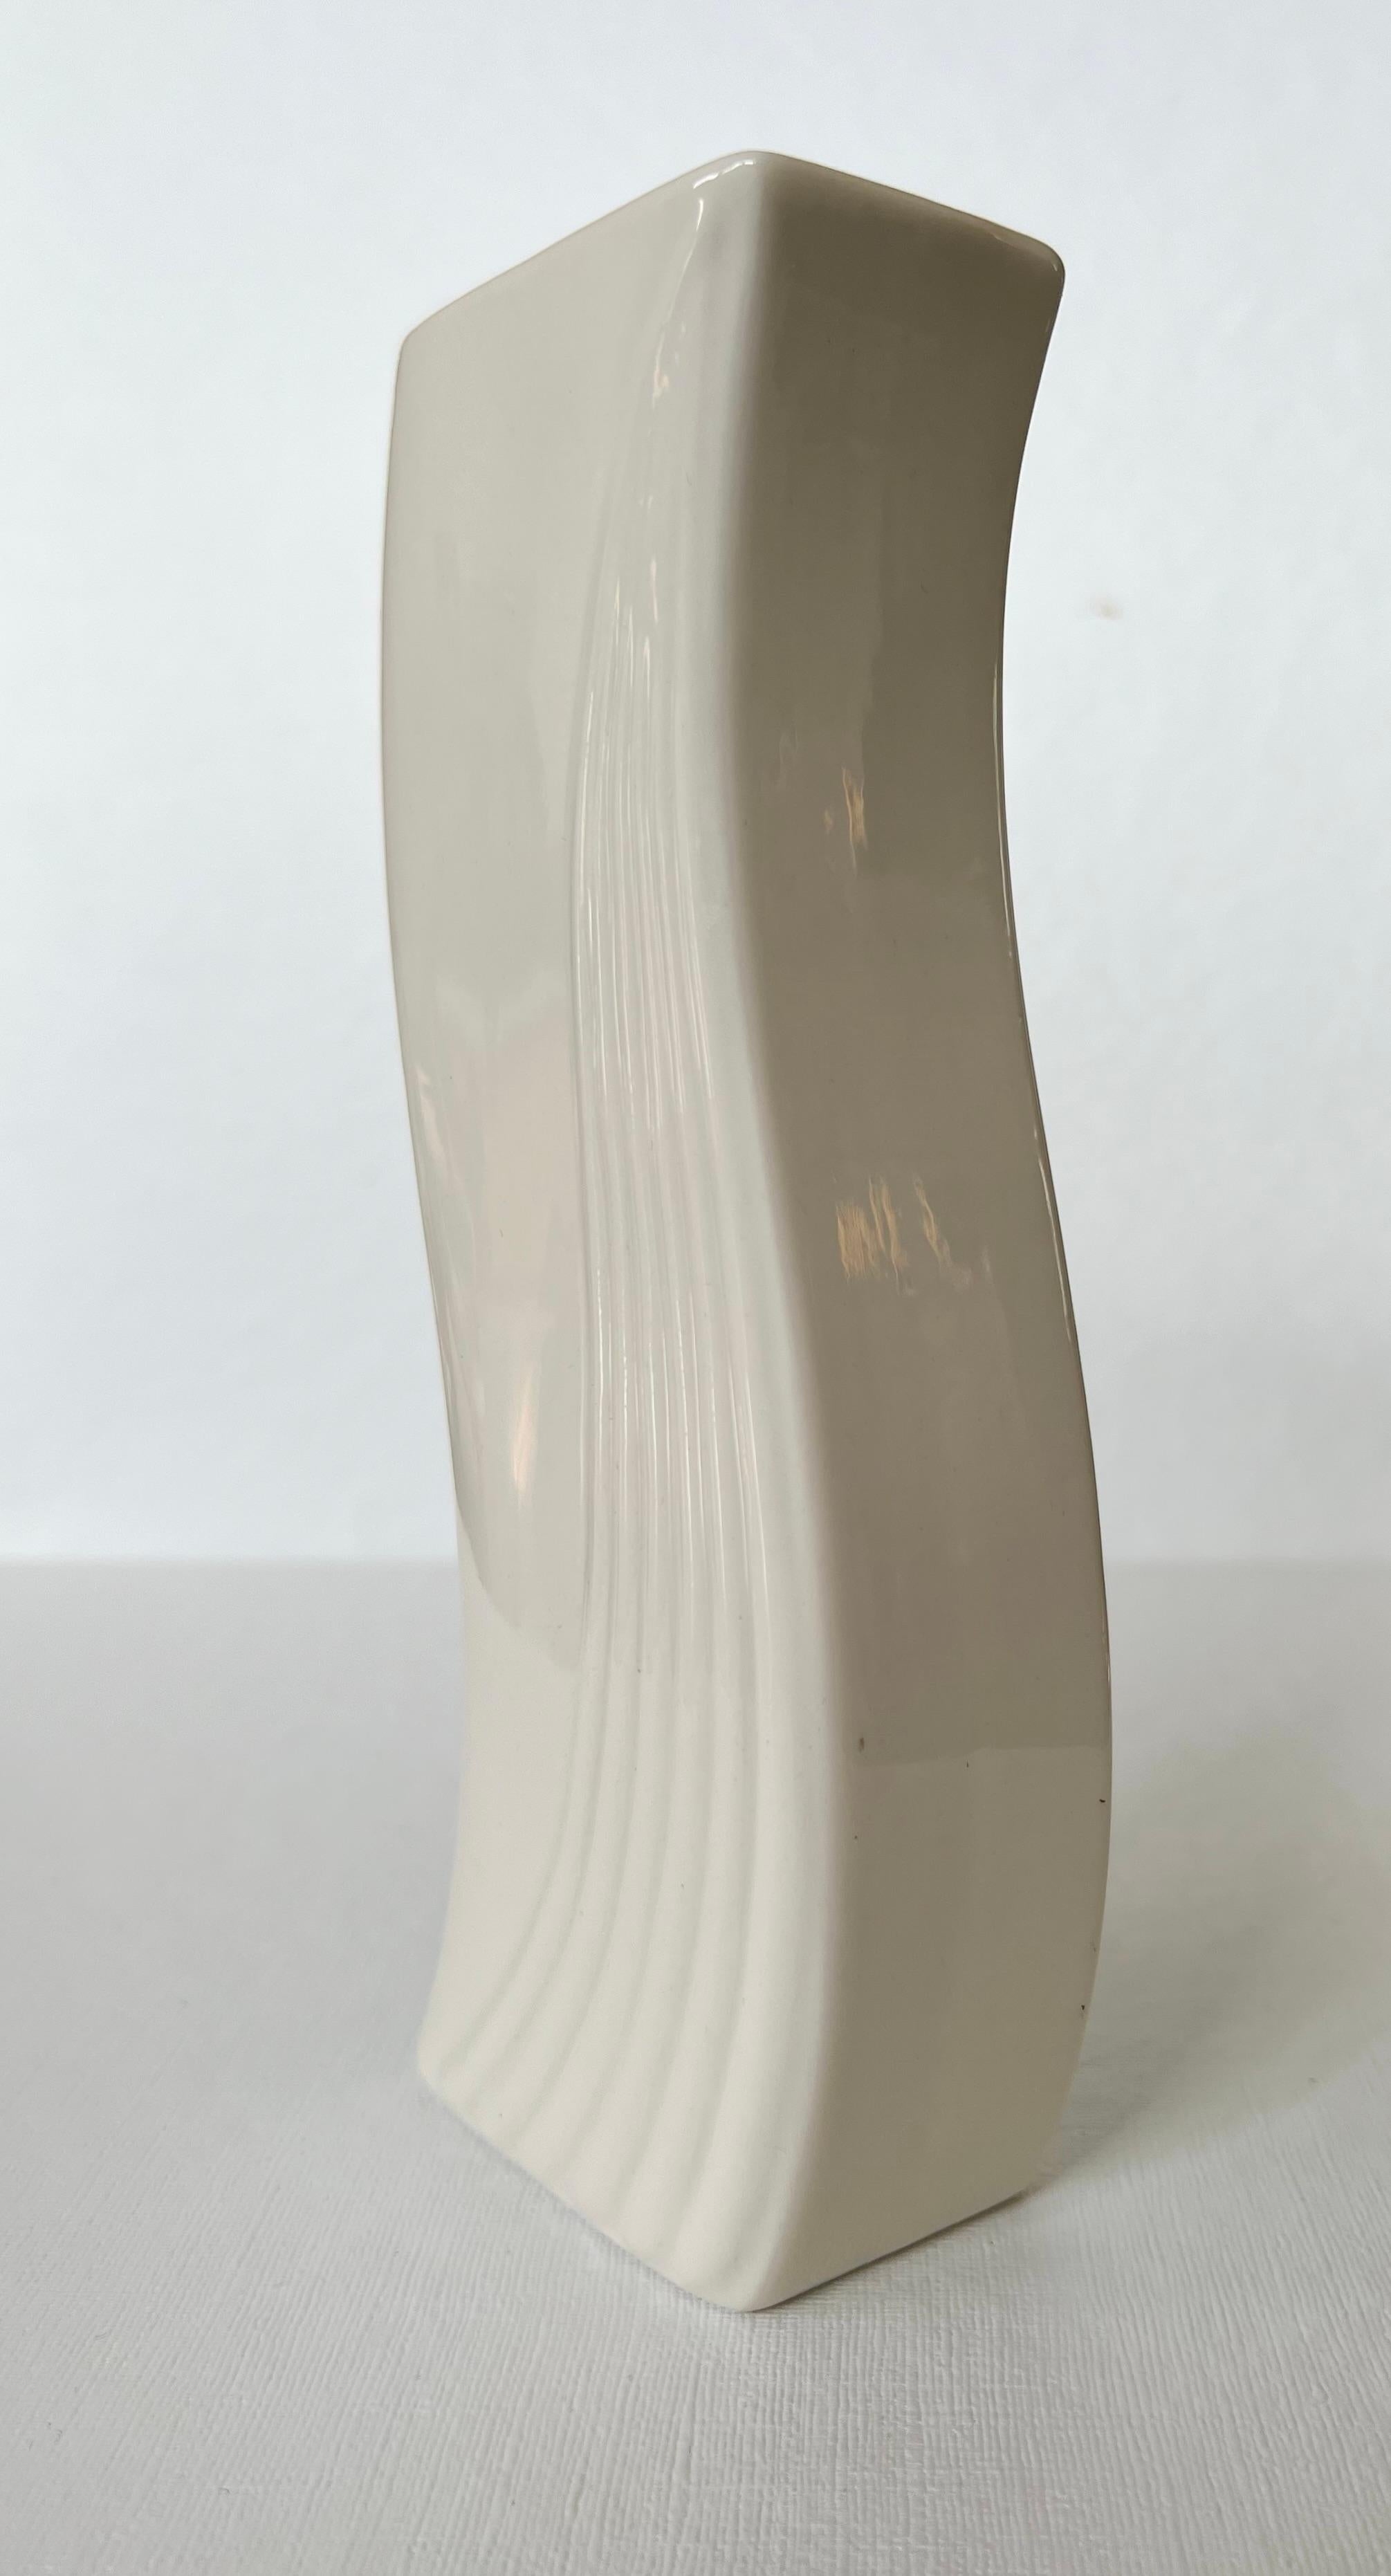 Contemporary Art Deco Porcelain Cream Candlestick Candleholder by Beleek Pottery Ireland For Sale